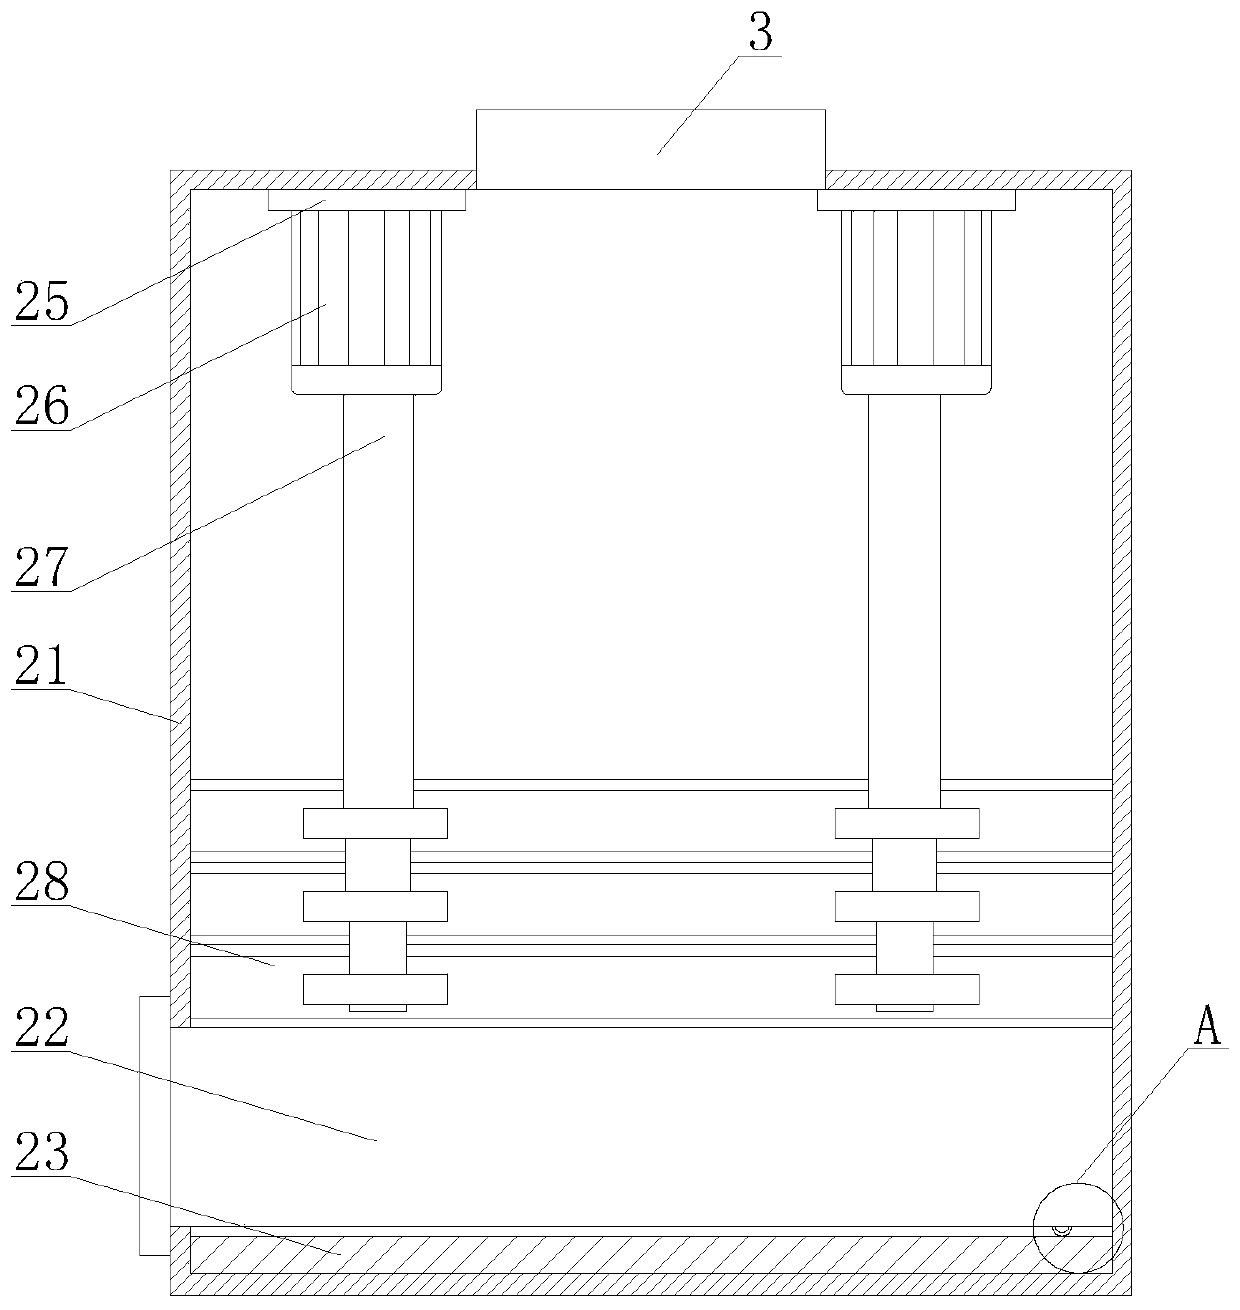 Through-flower heat dissipation device and method for handmade osmanthus tea